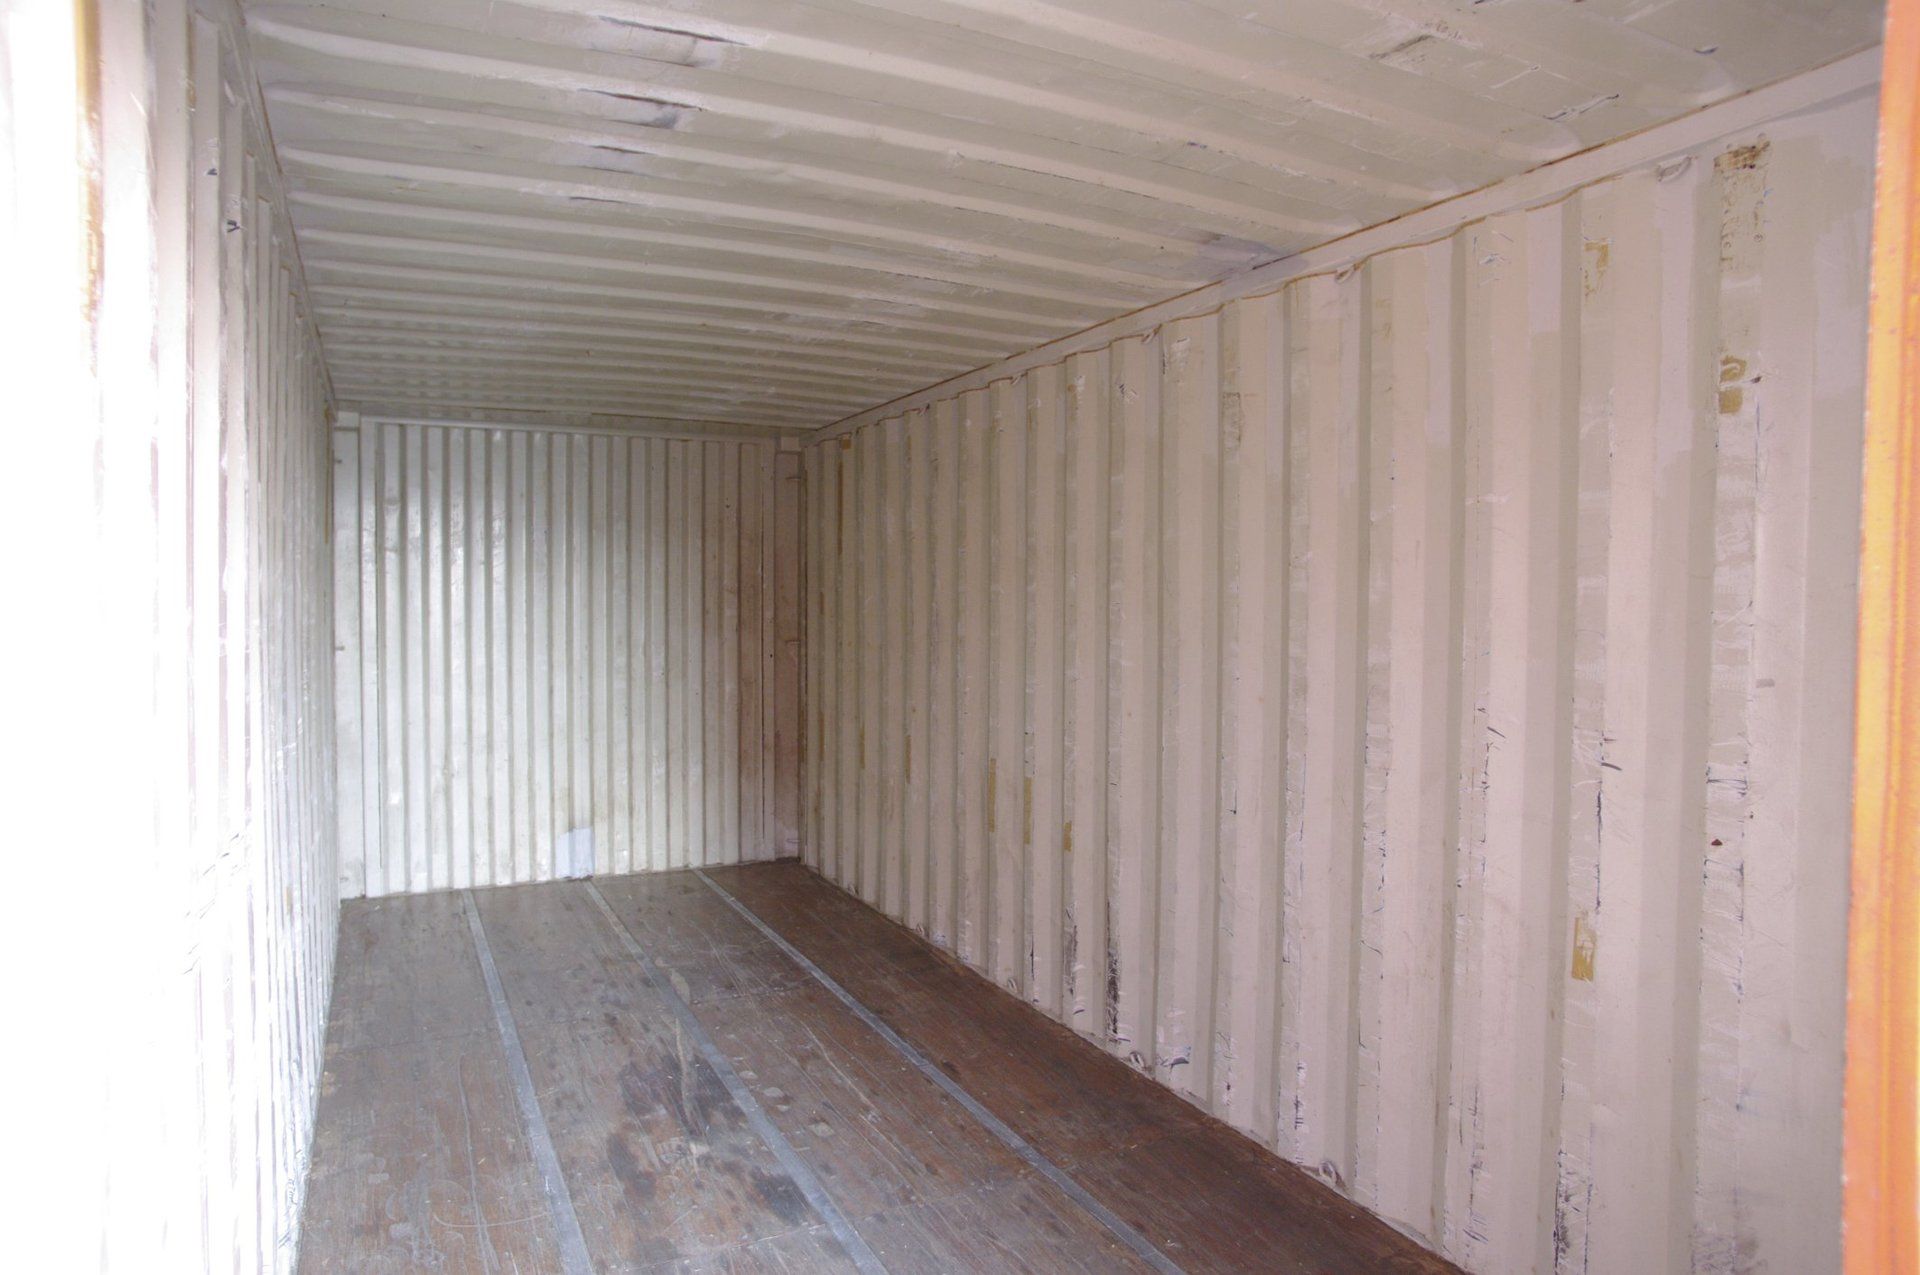 inside the storage container